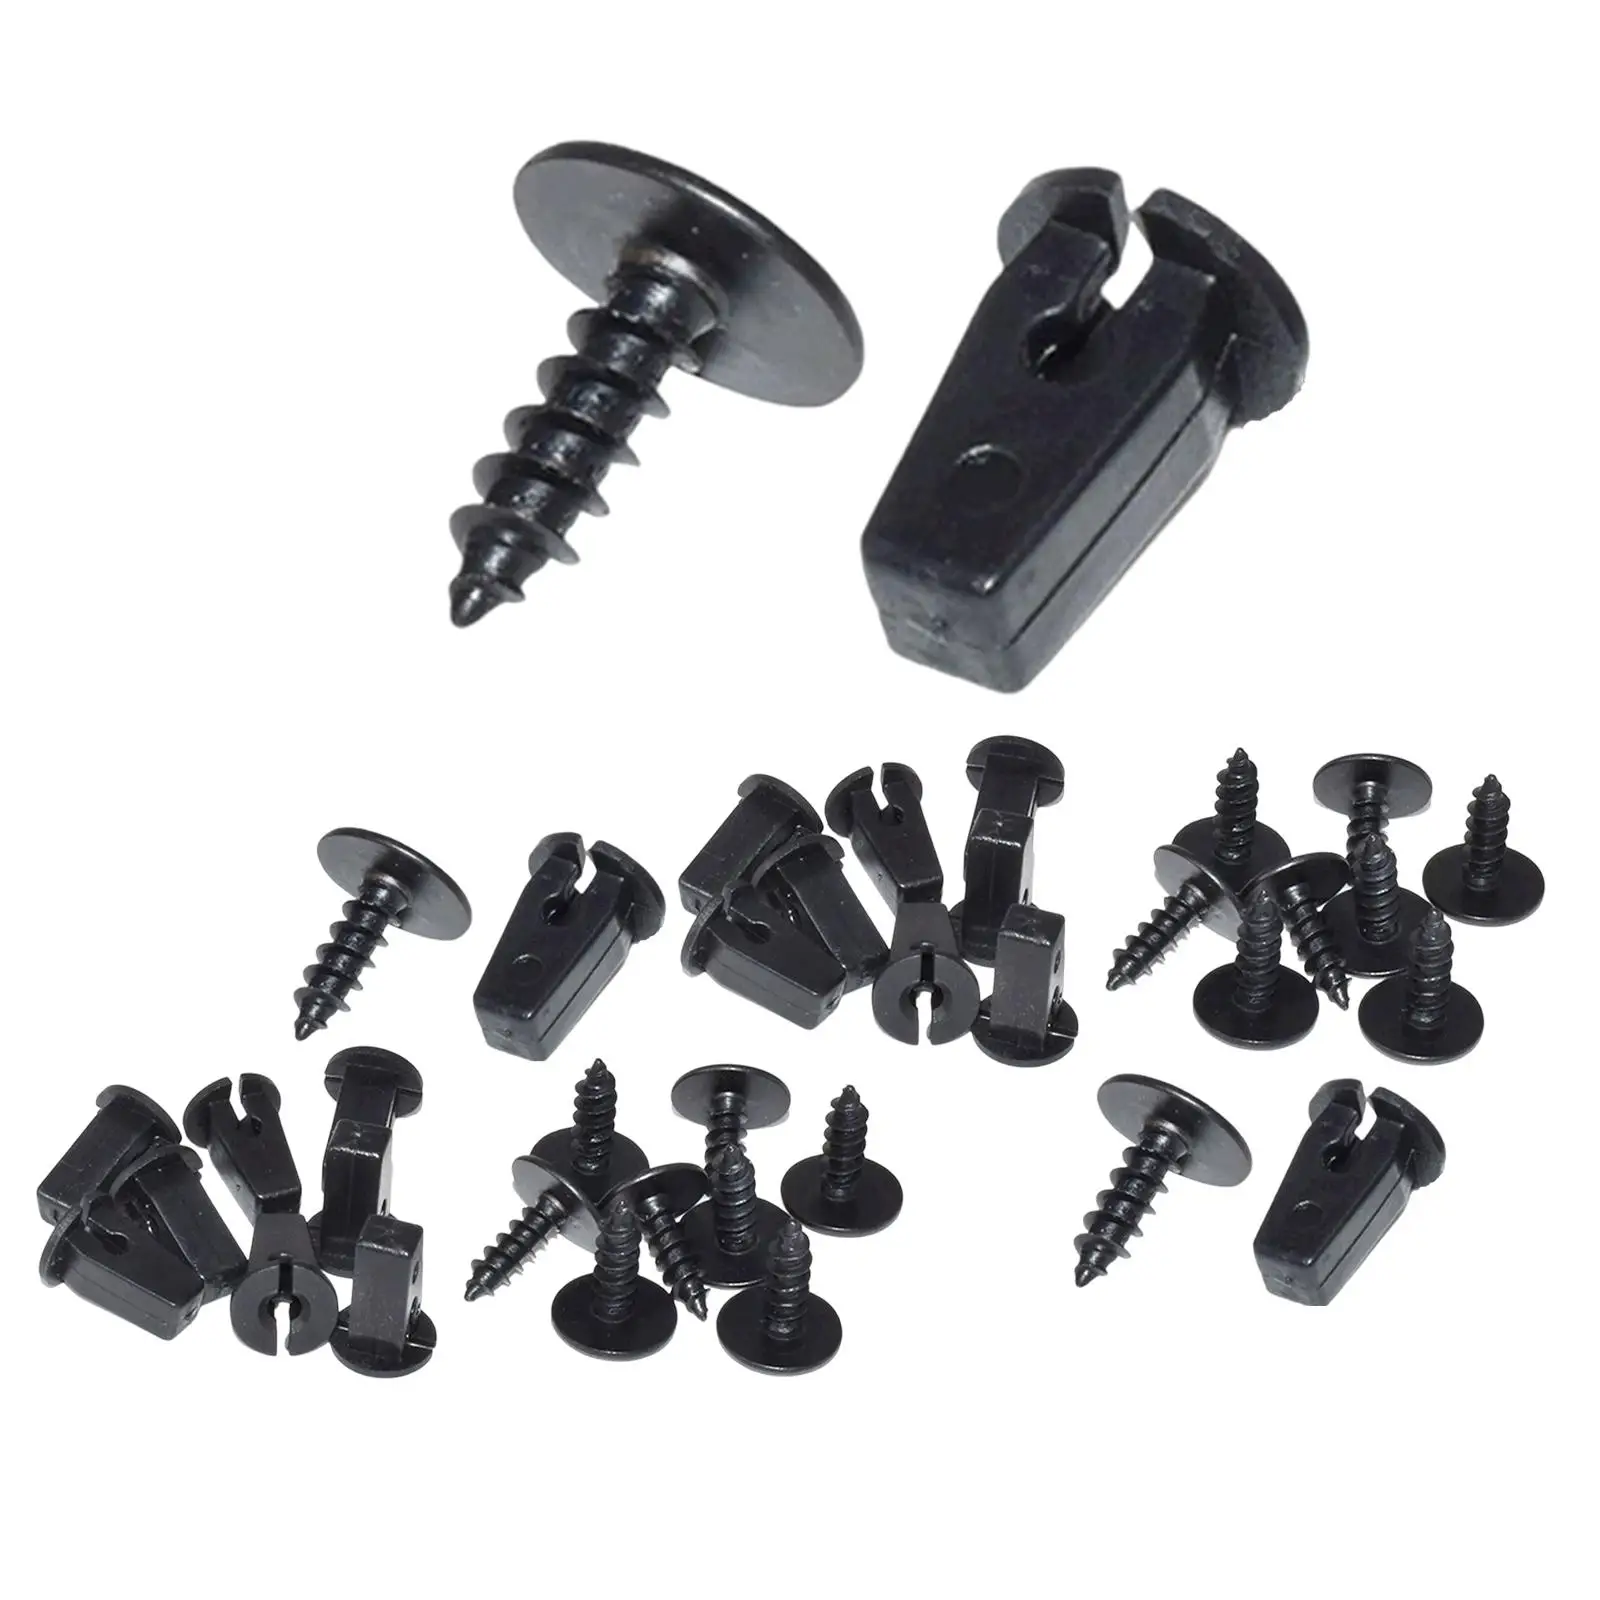  Nuts Grommets Screws Replacement Kit Plastic for Bumper Panel